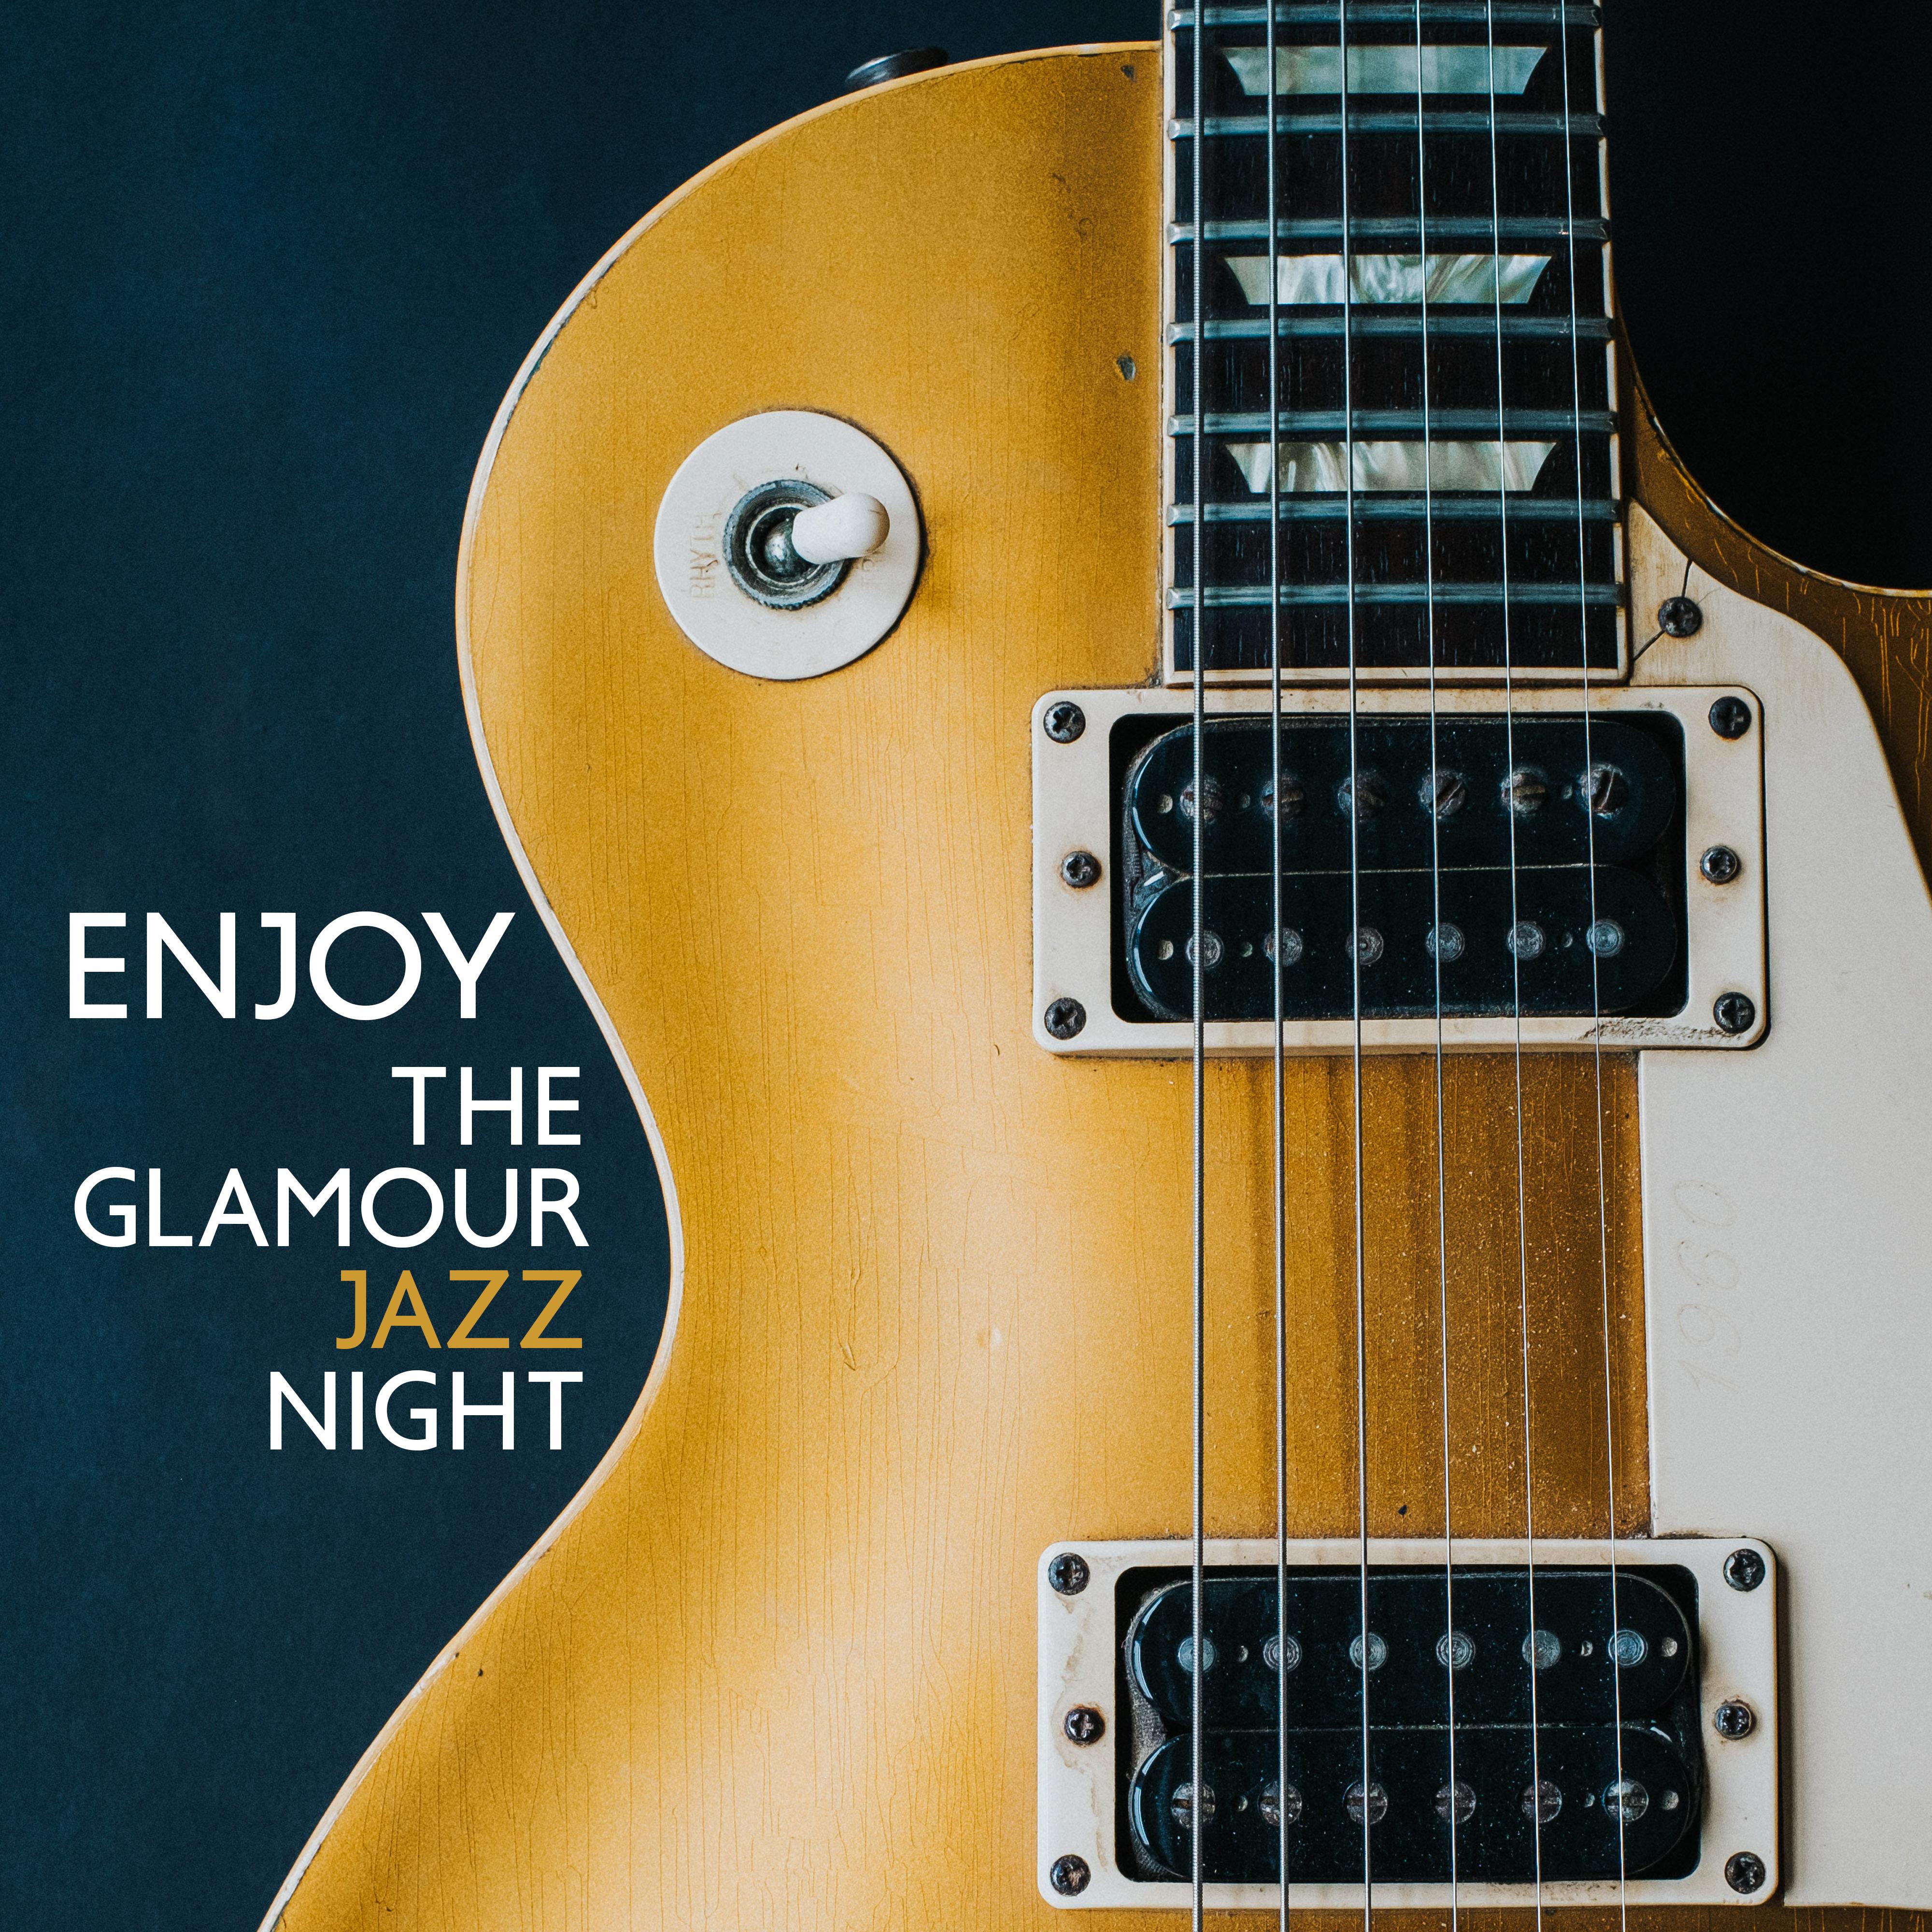 Enjoy the Glamour Jazz Night: 2019 Vintage Smooth Jazz Tracks for Jazz Cocktail & Food Exclusive Party